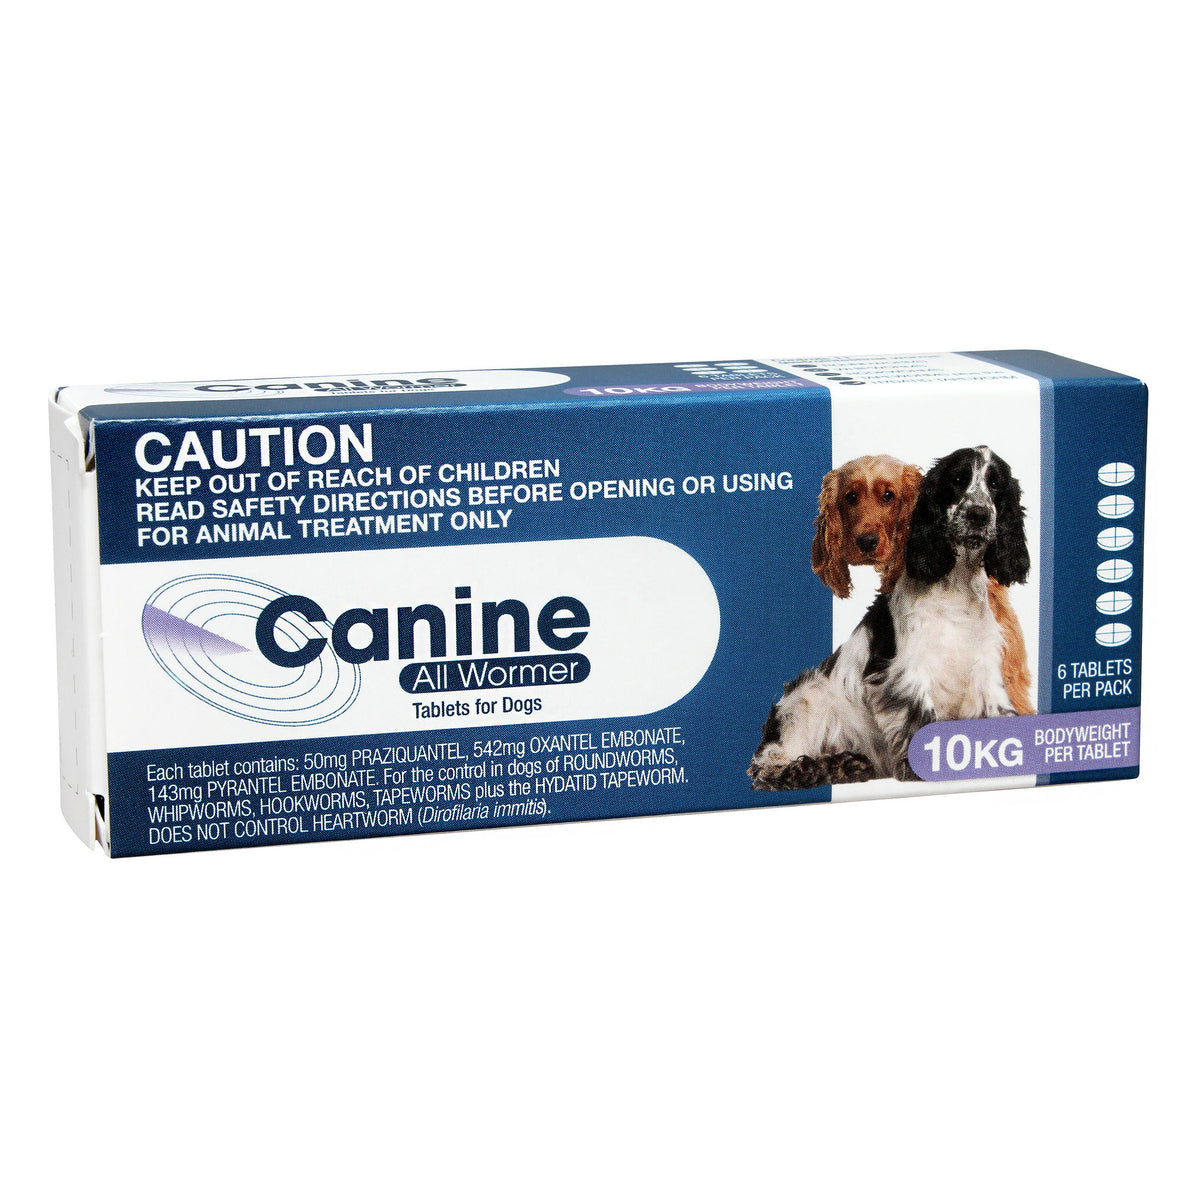 Value Plus Canine All Wormer Tablets